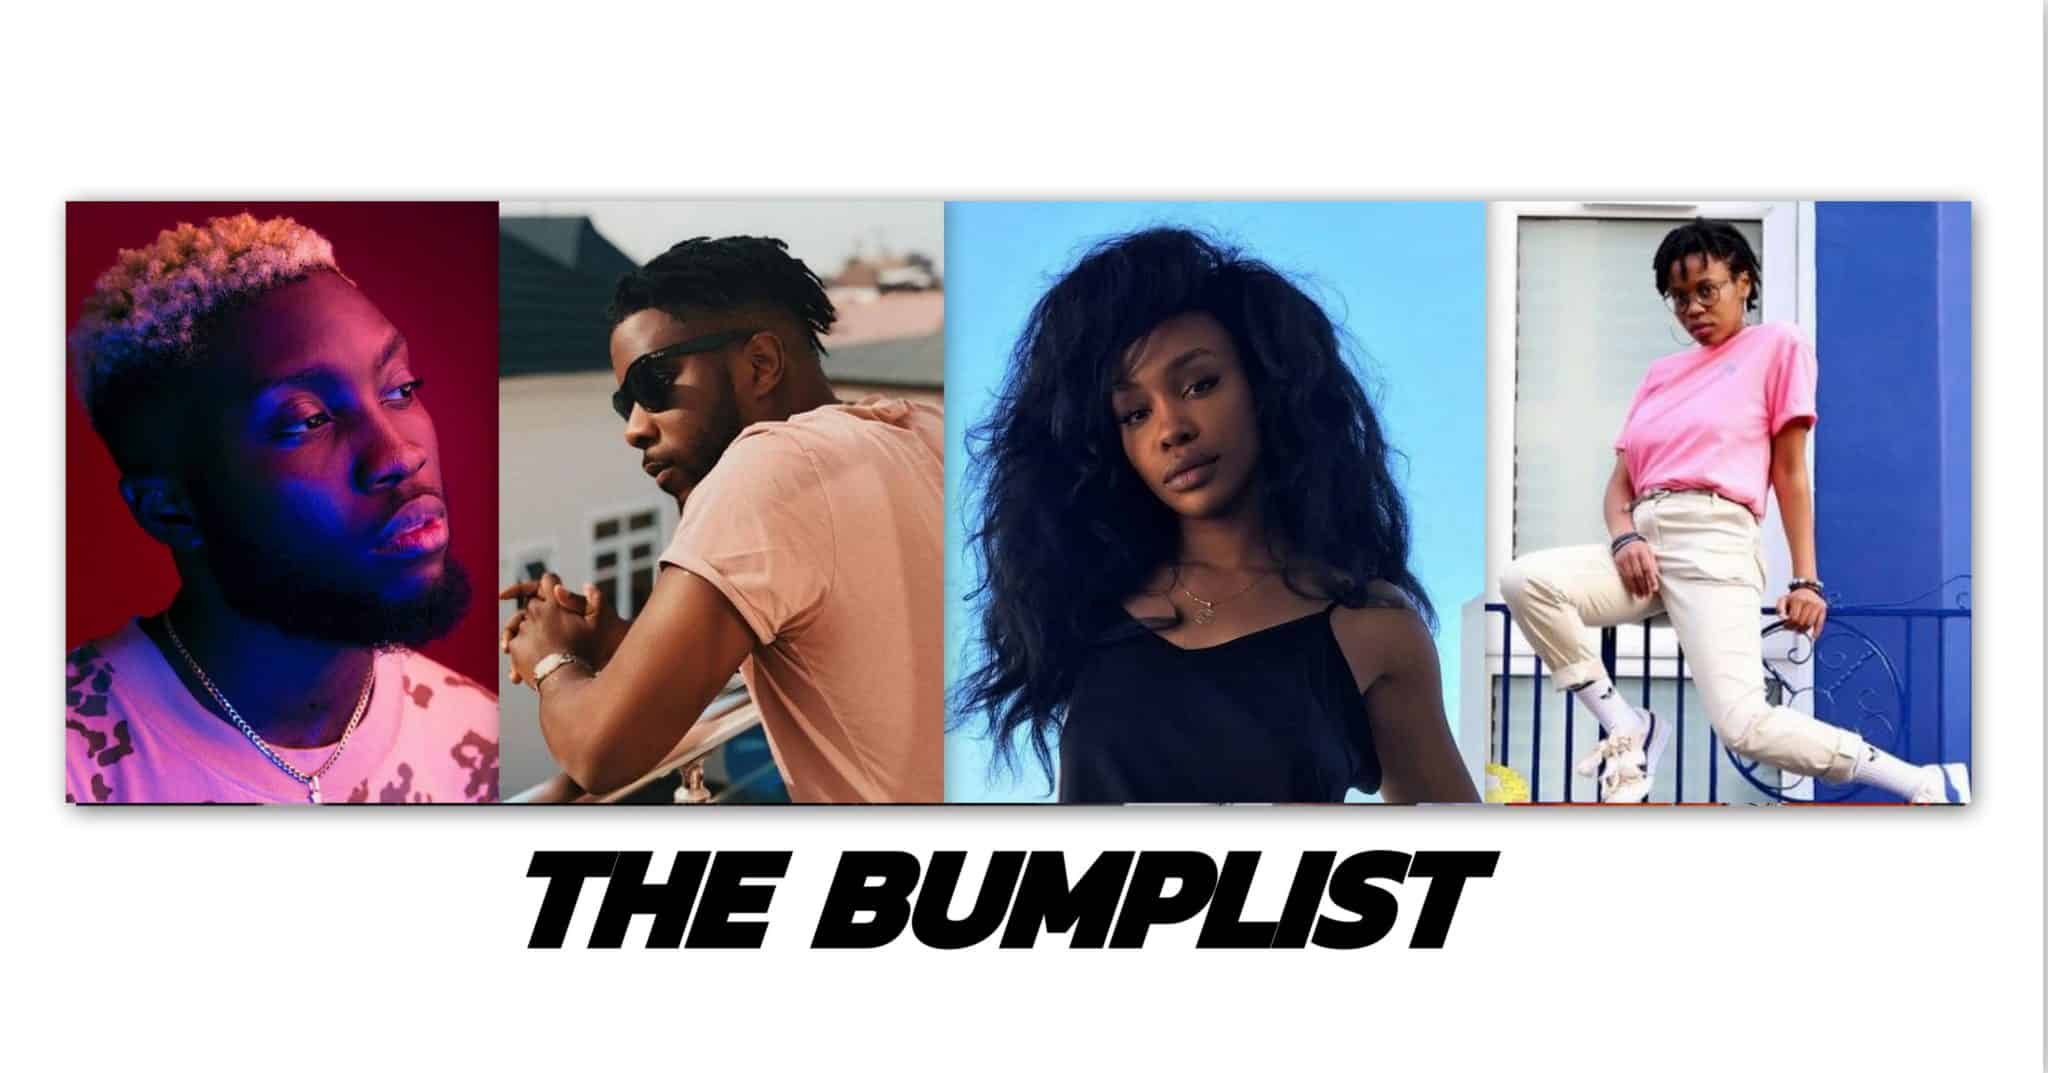 The Bumplist:  SZA, Lady Donli, Maleek Berry and 10 other songs you need to hear this week